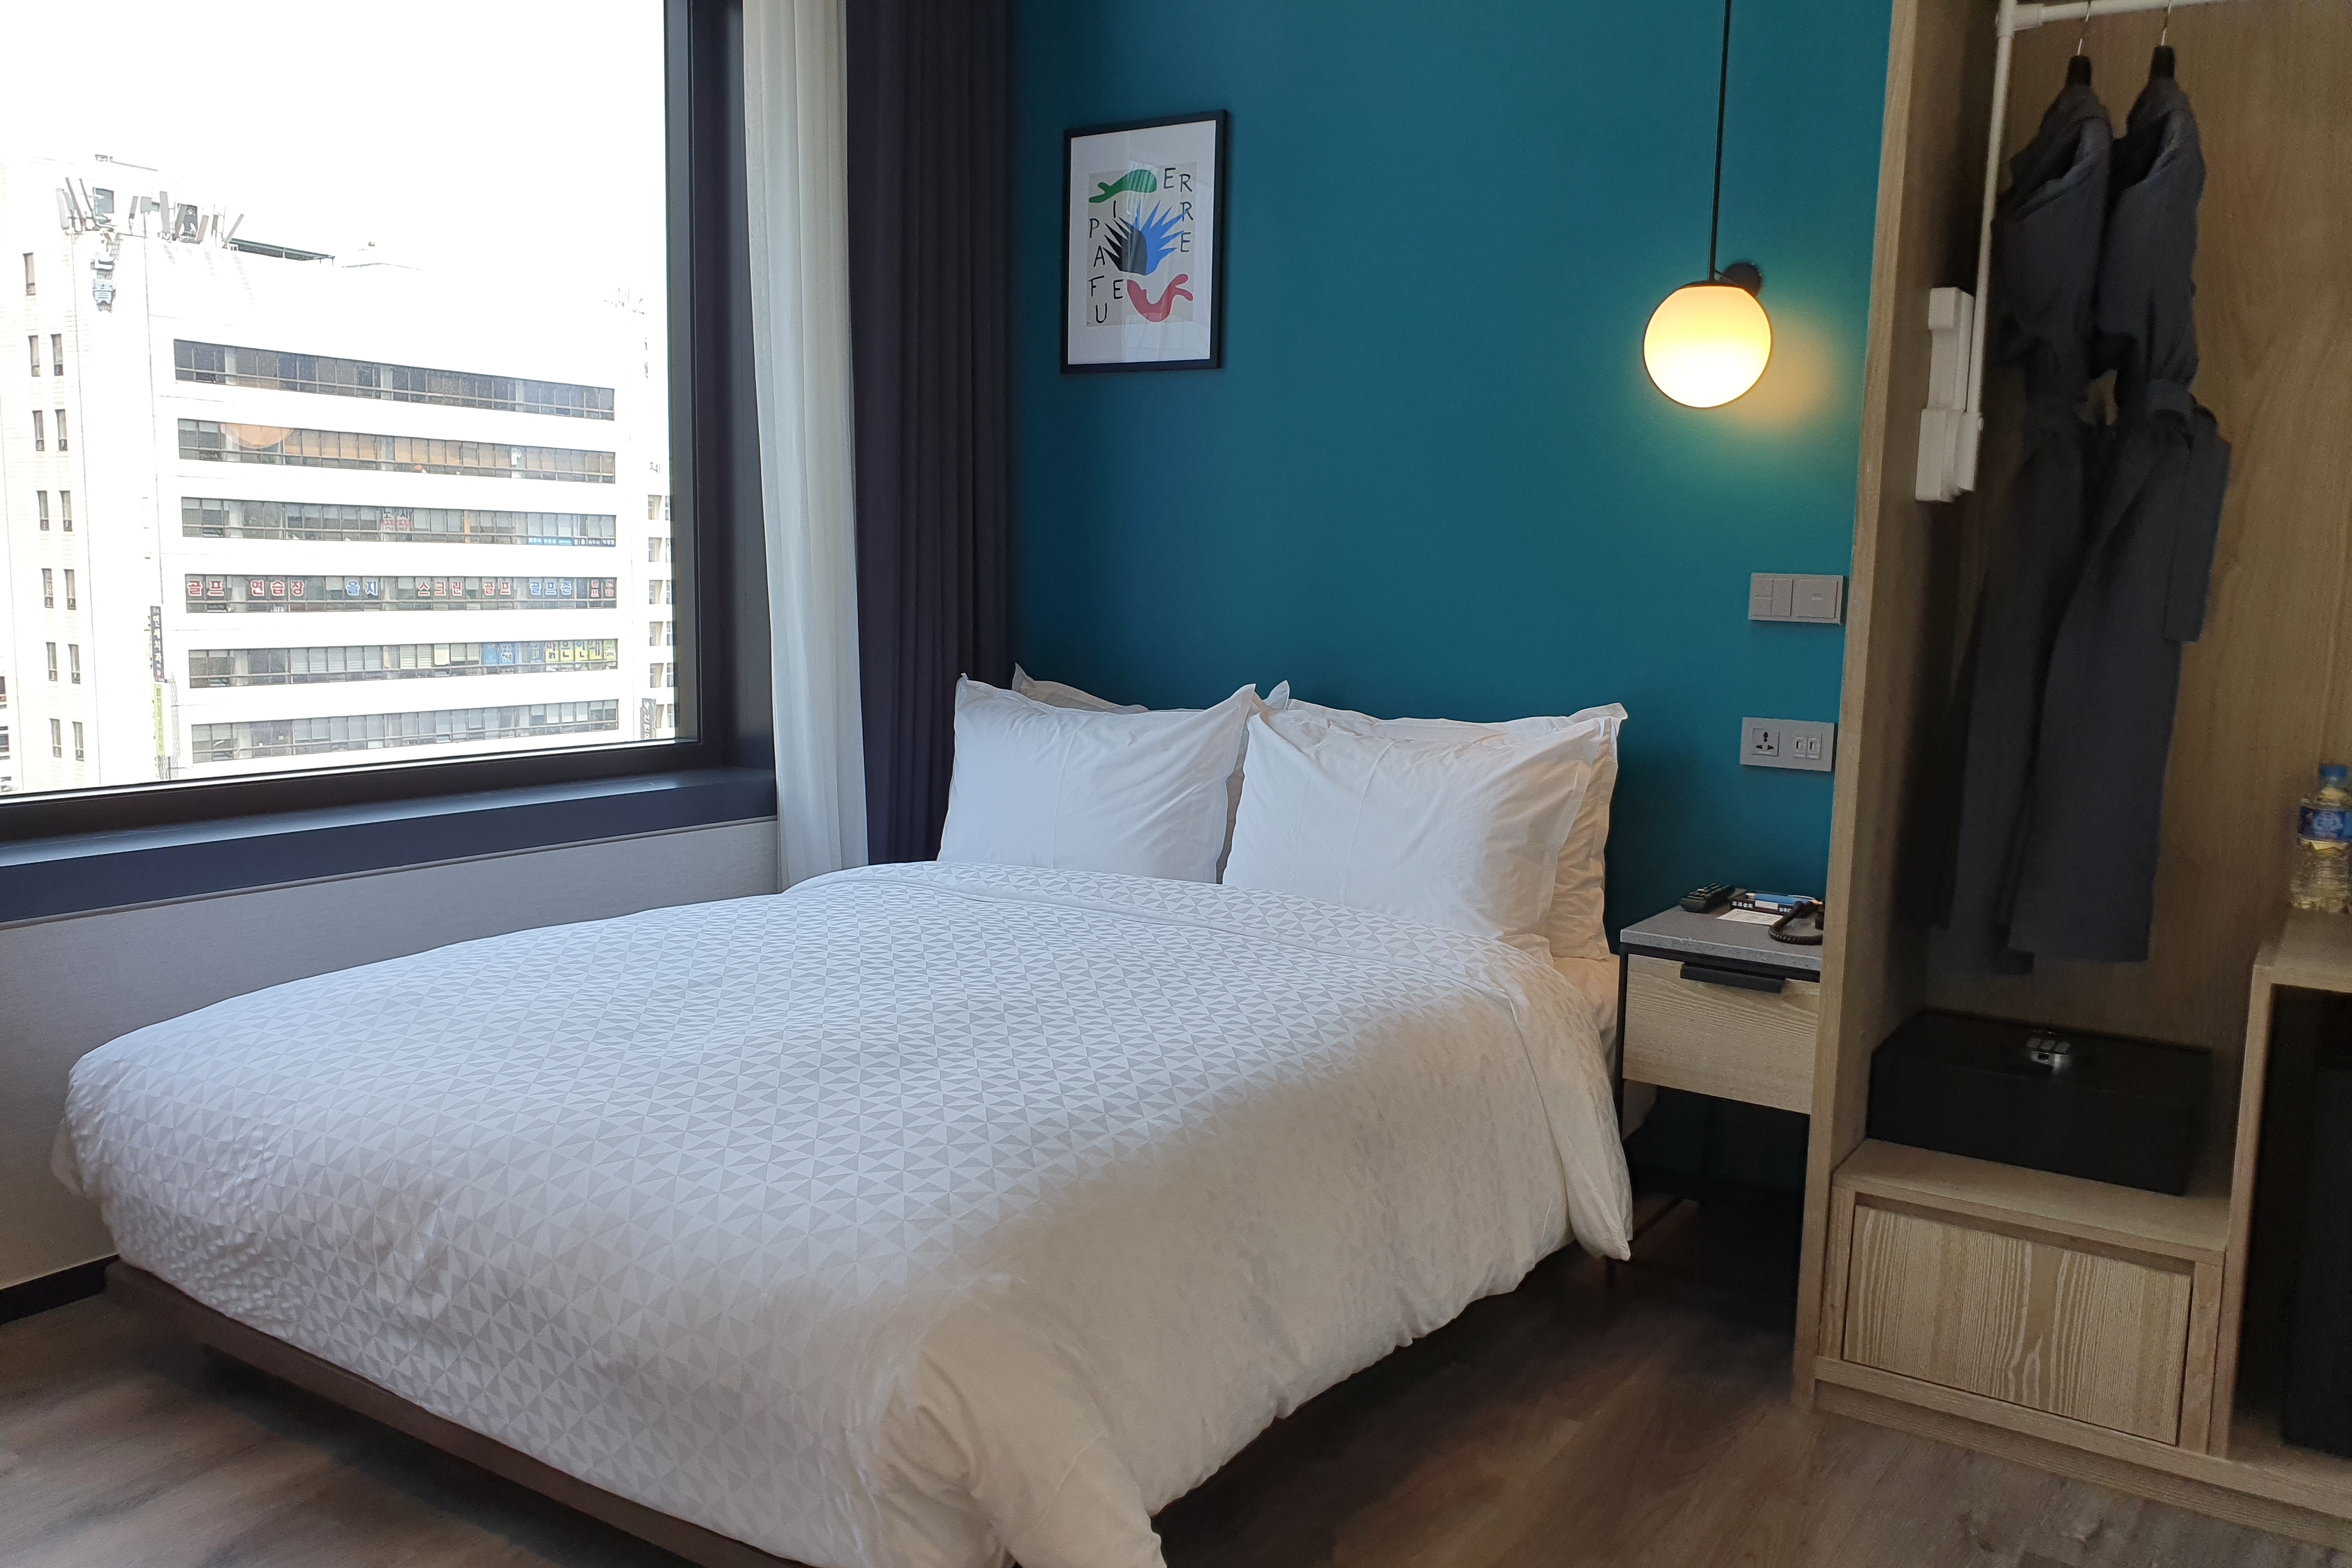 Four Points by Sheraton Josun, Seoul Myeongdong2 : Neat and modern hotel room